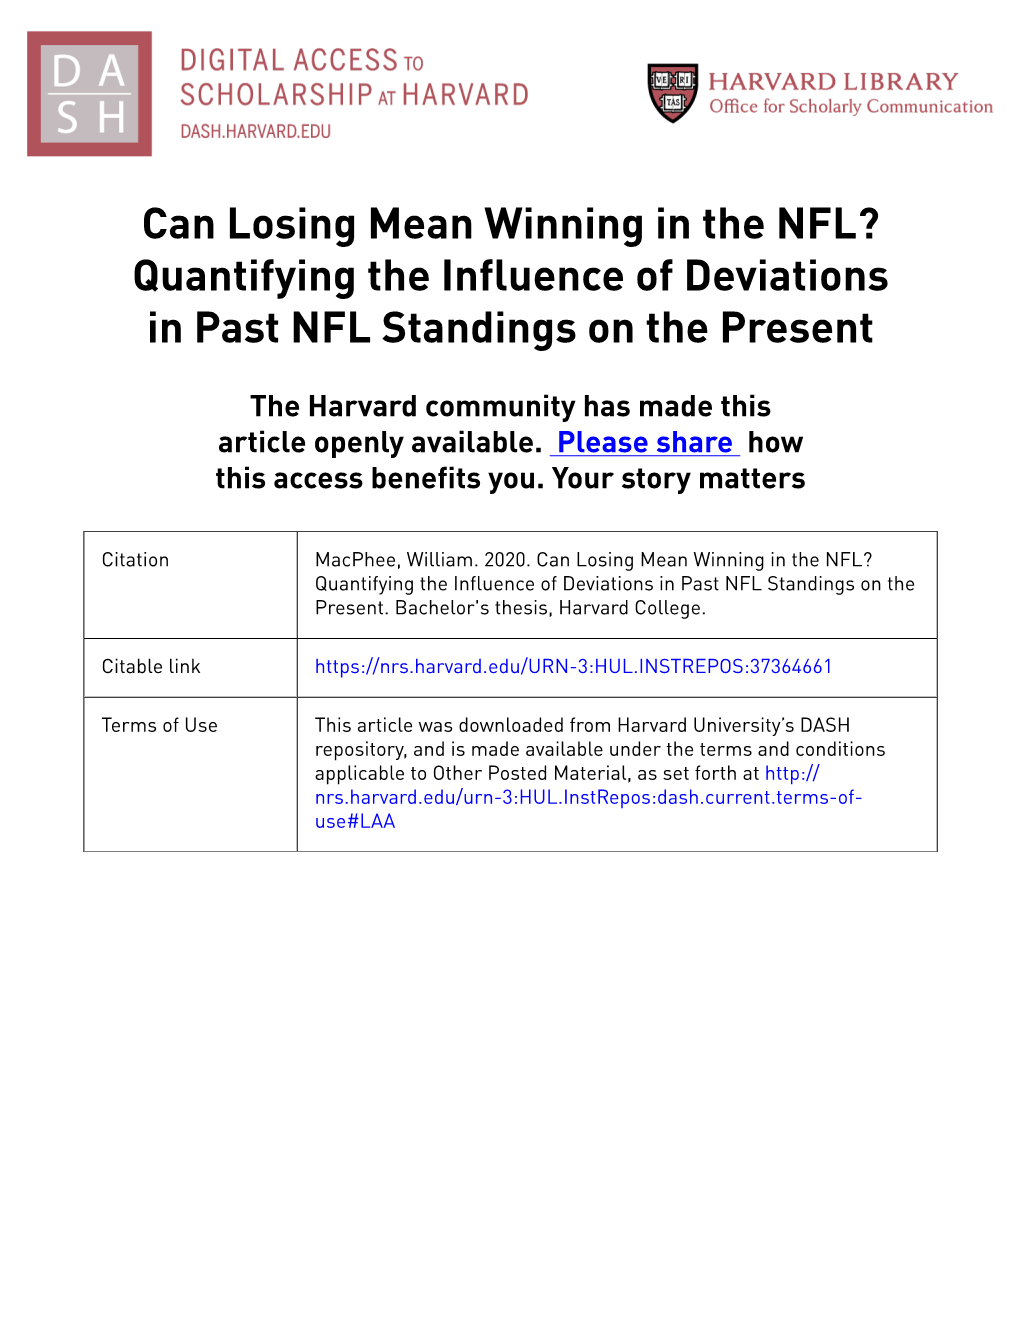 Quantifying the Influence of Deviations in Past NFL Standings on the Present